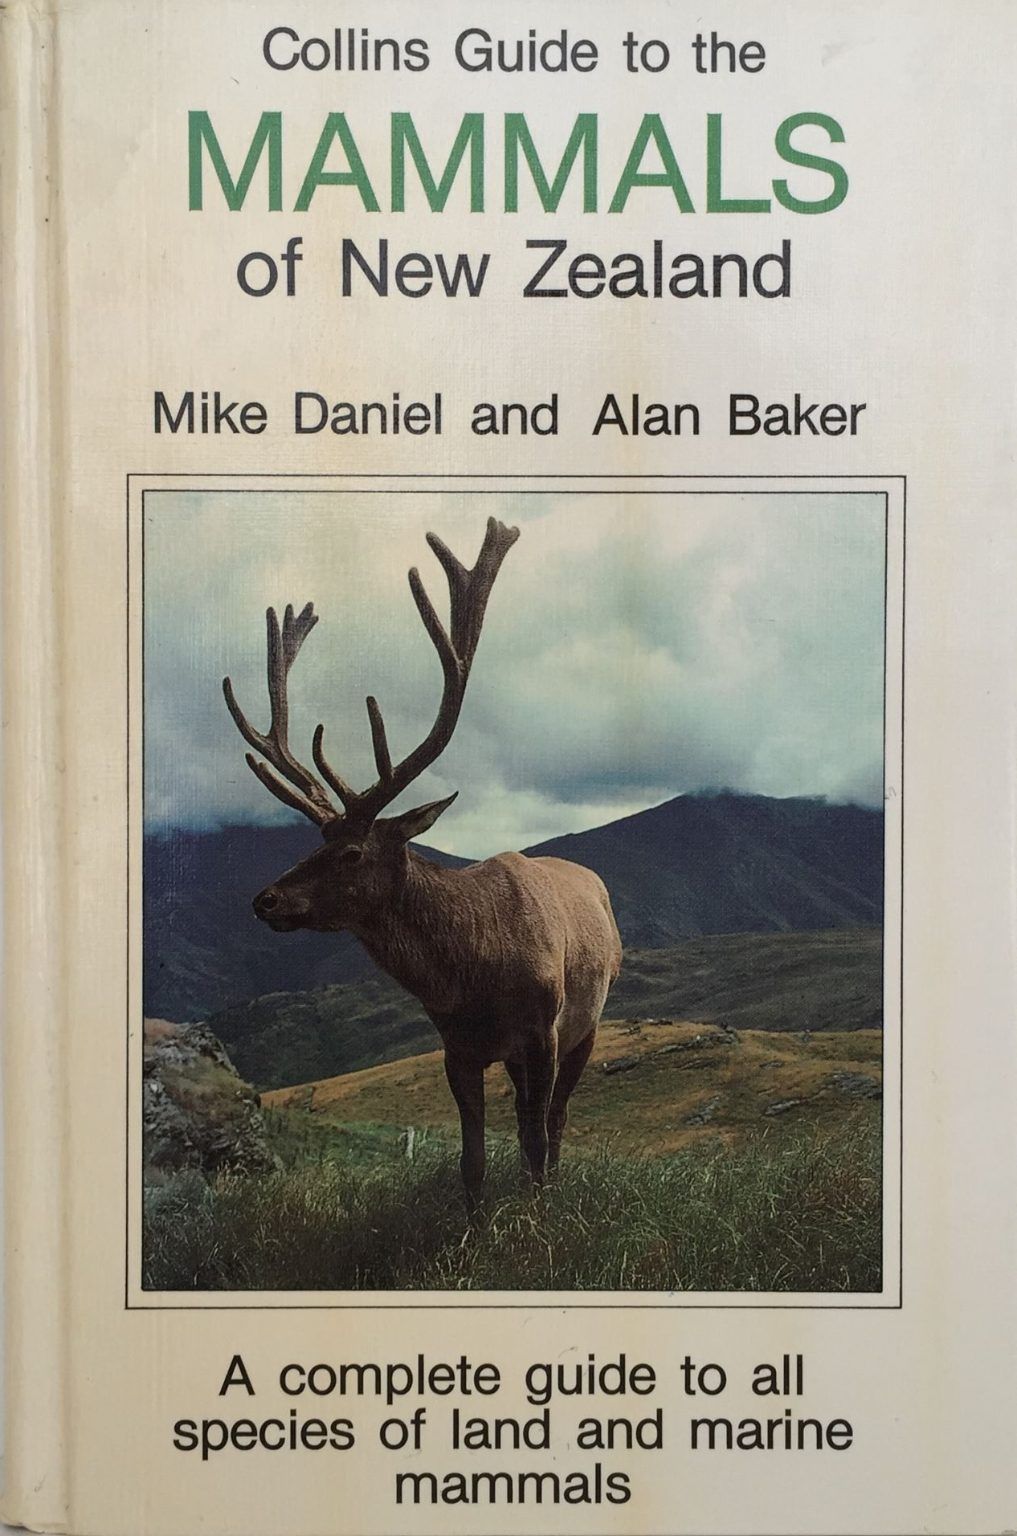 MAMMALS OF NEW ZEALAND: A complete guide to all species of land and marine mammals